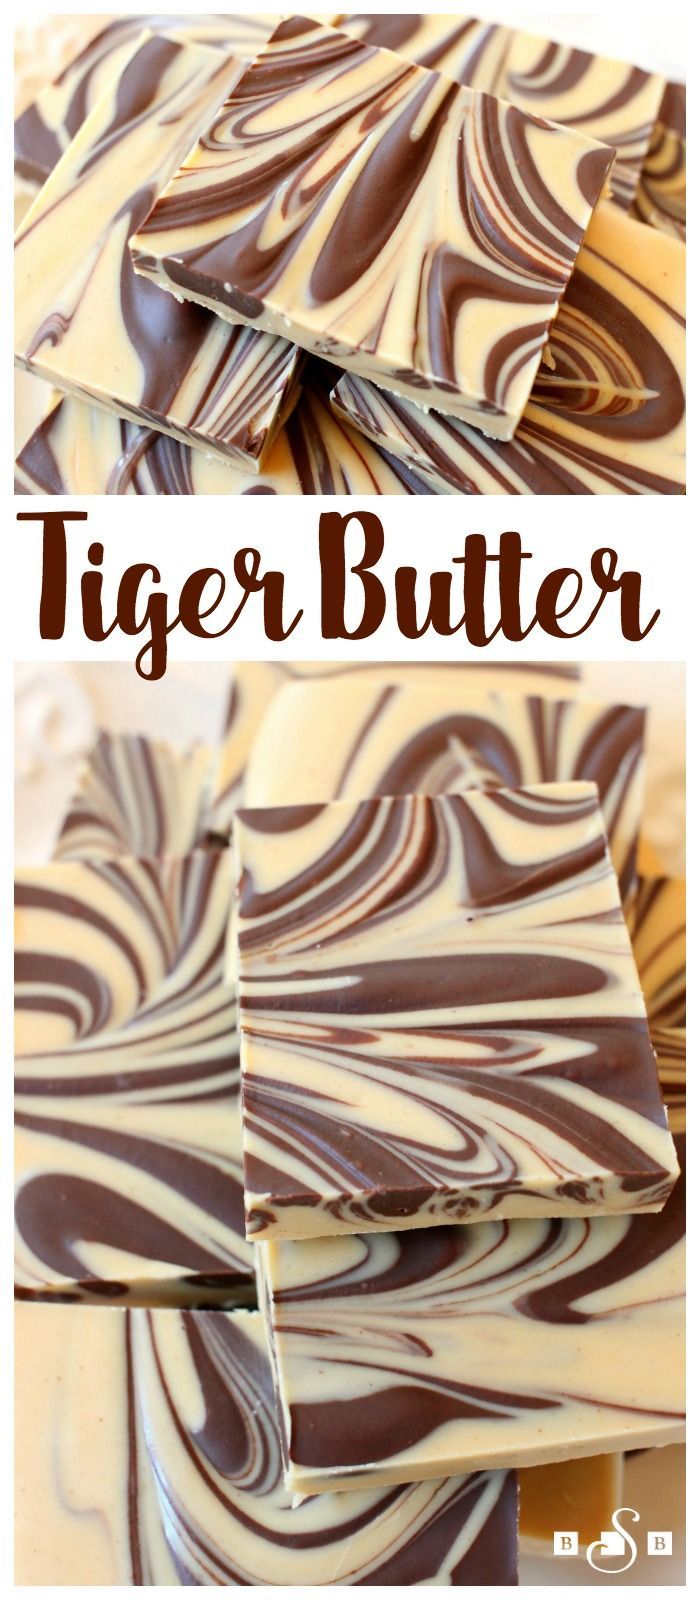 Tiger Butter Fudge – a simple but indulgent fudge recipe that requires only 3 ingr